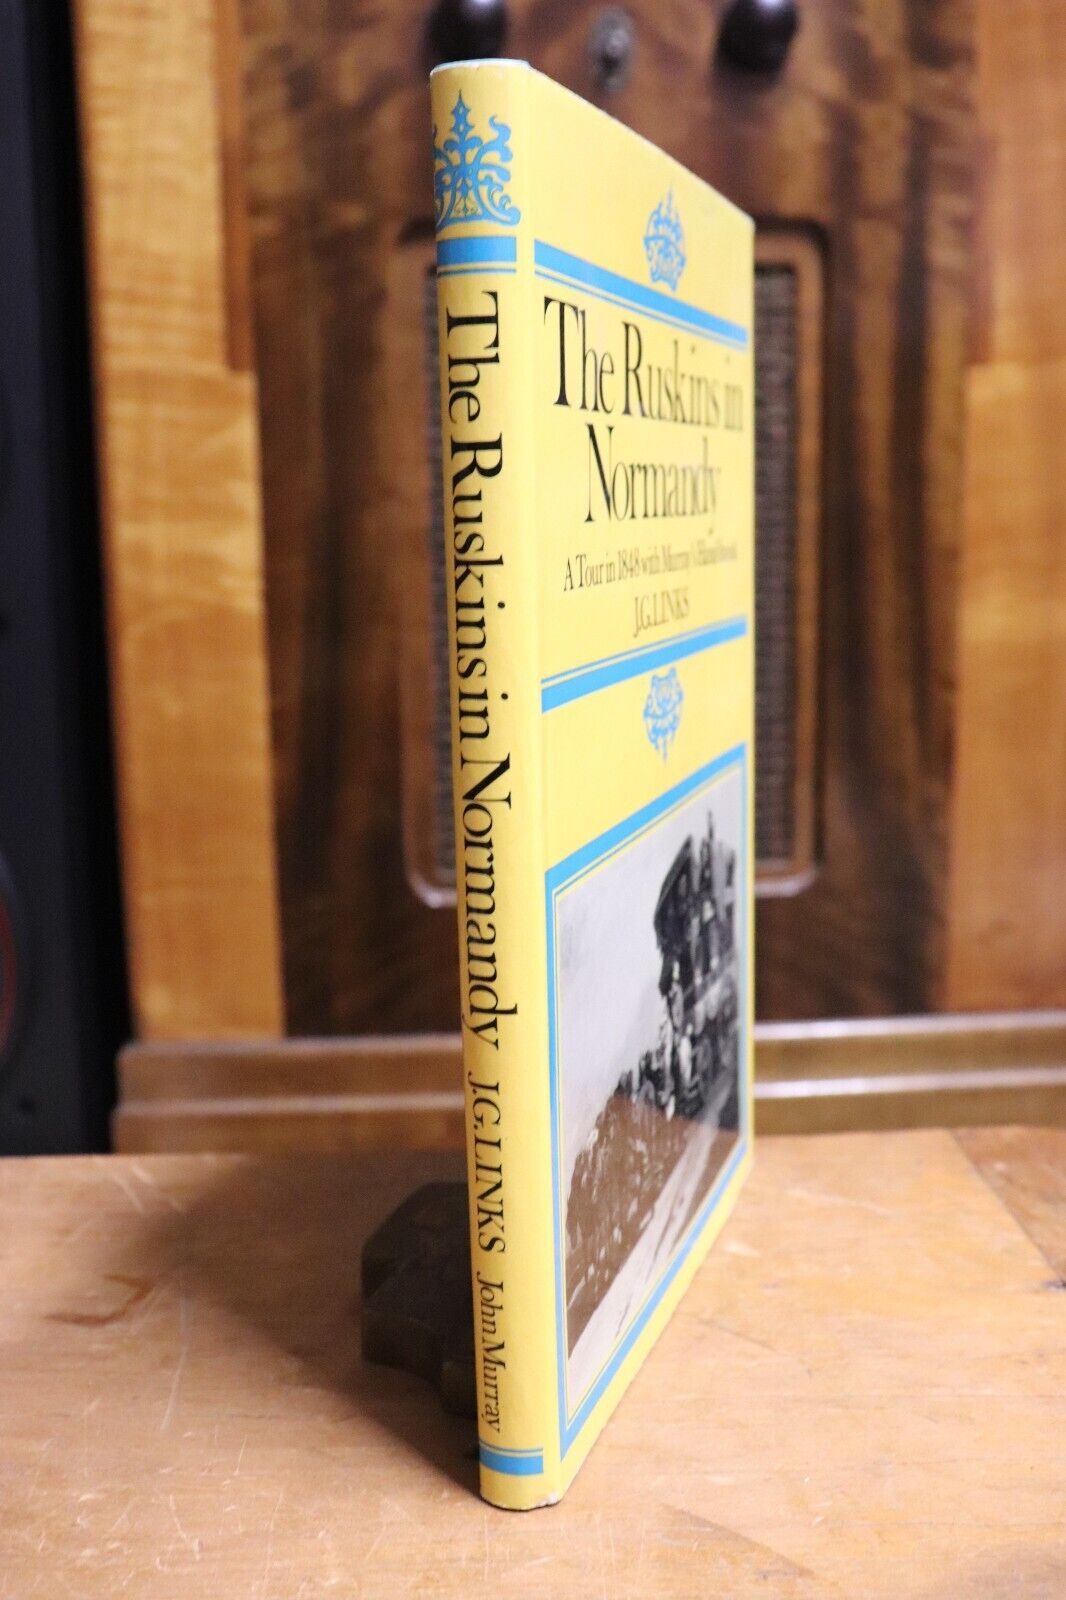 1968 The Ruskins In Normandy by J.G. Links Travel Book France